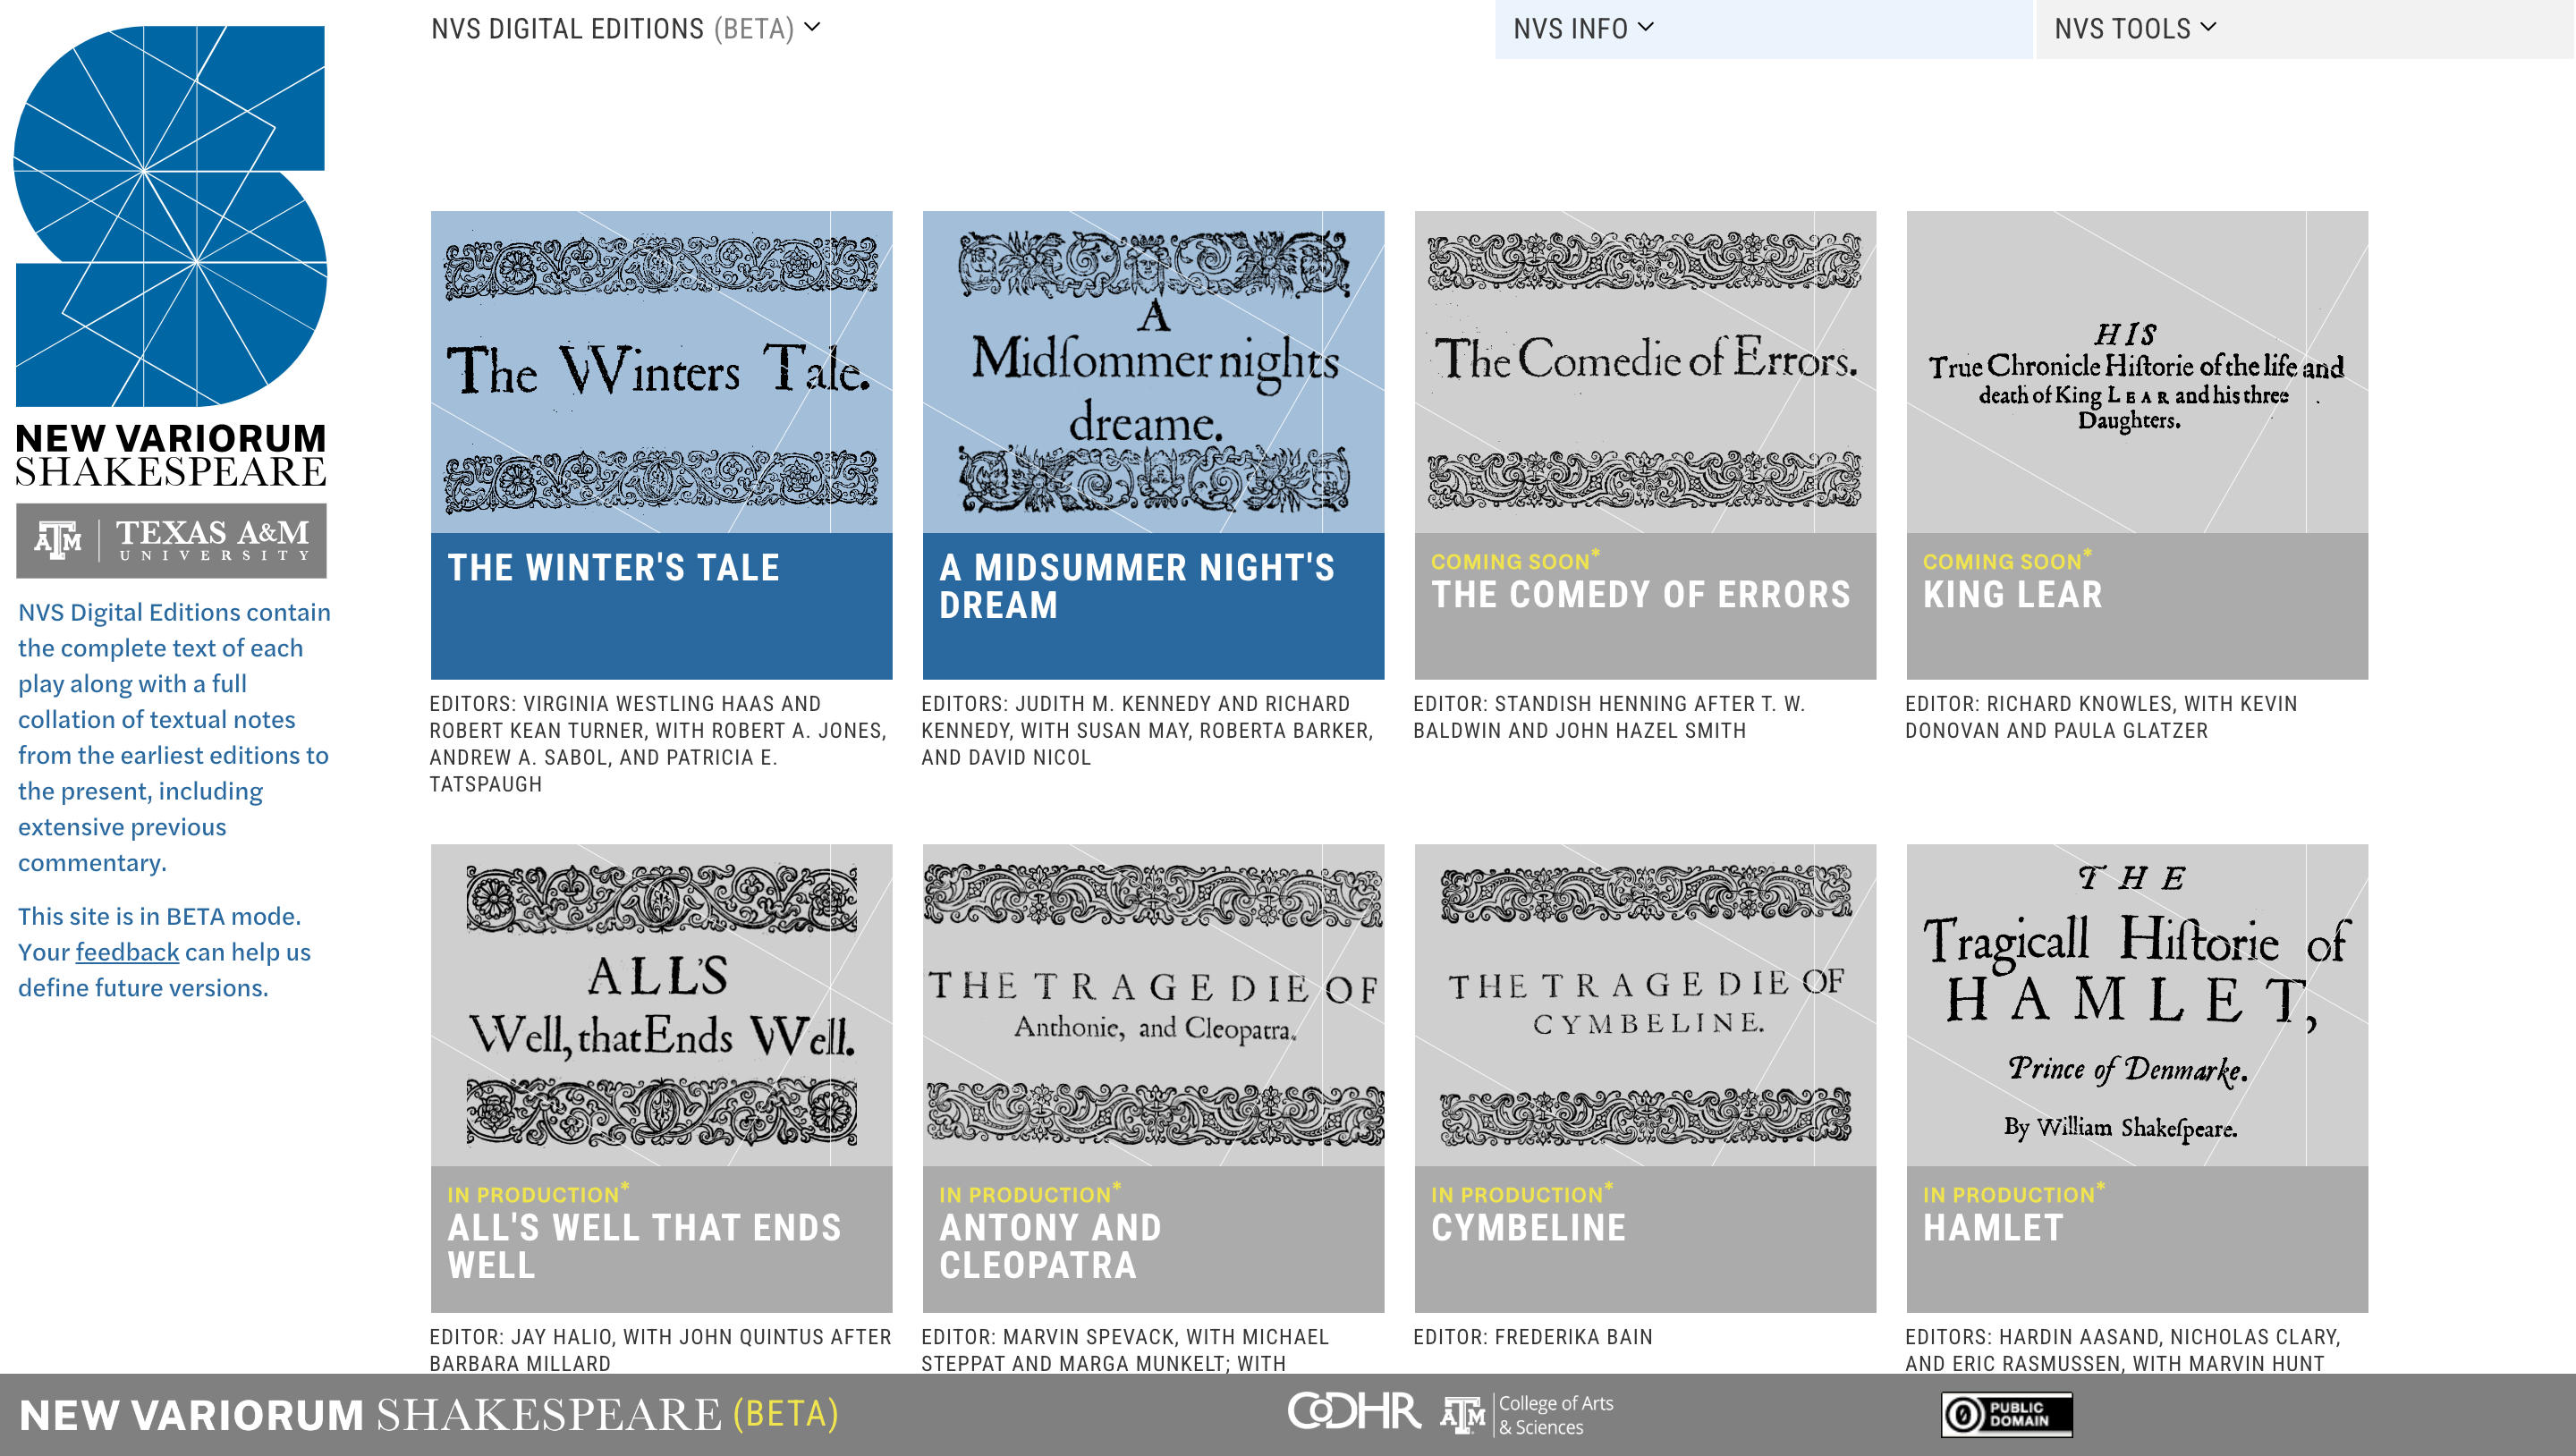 Screen shot of the New Variorum Shakespeare website housed at Texas A&amp;M University